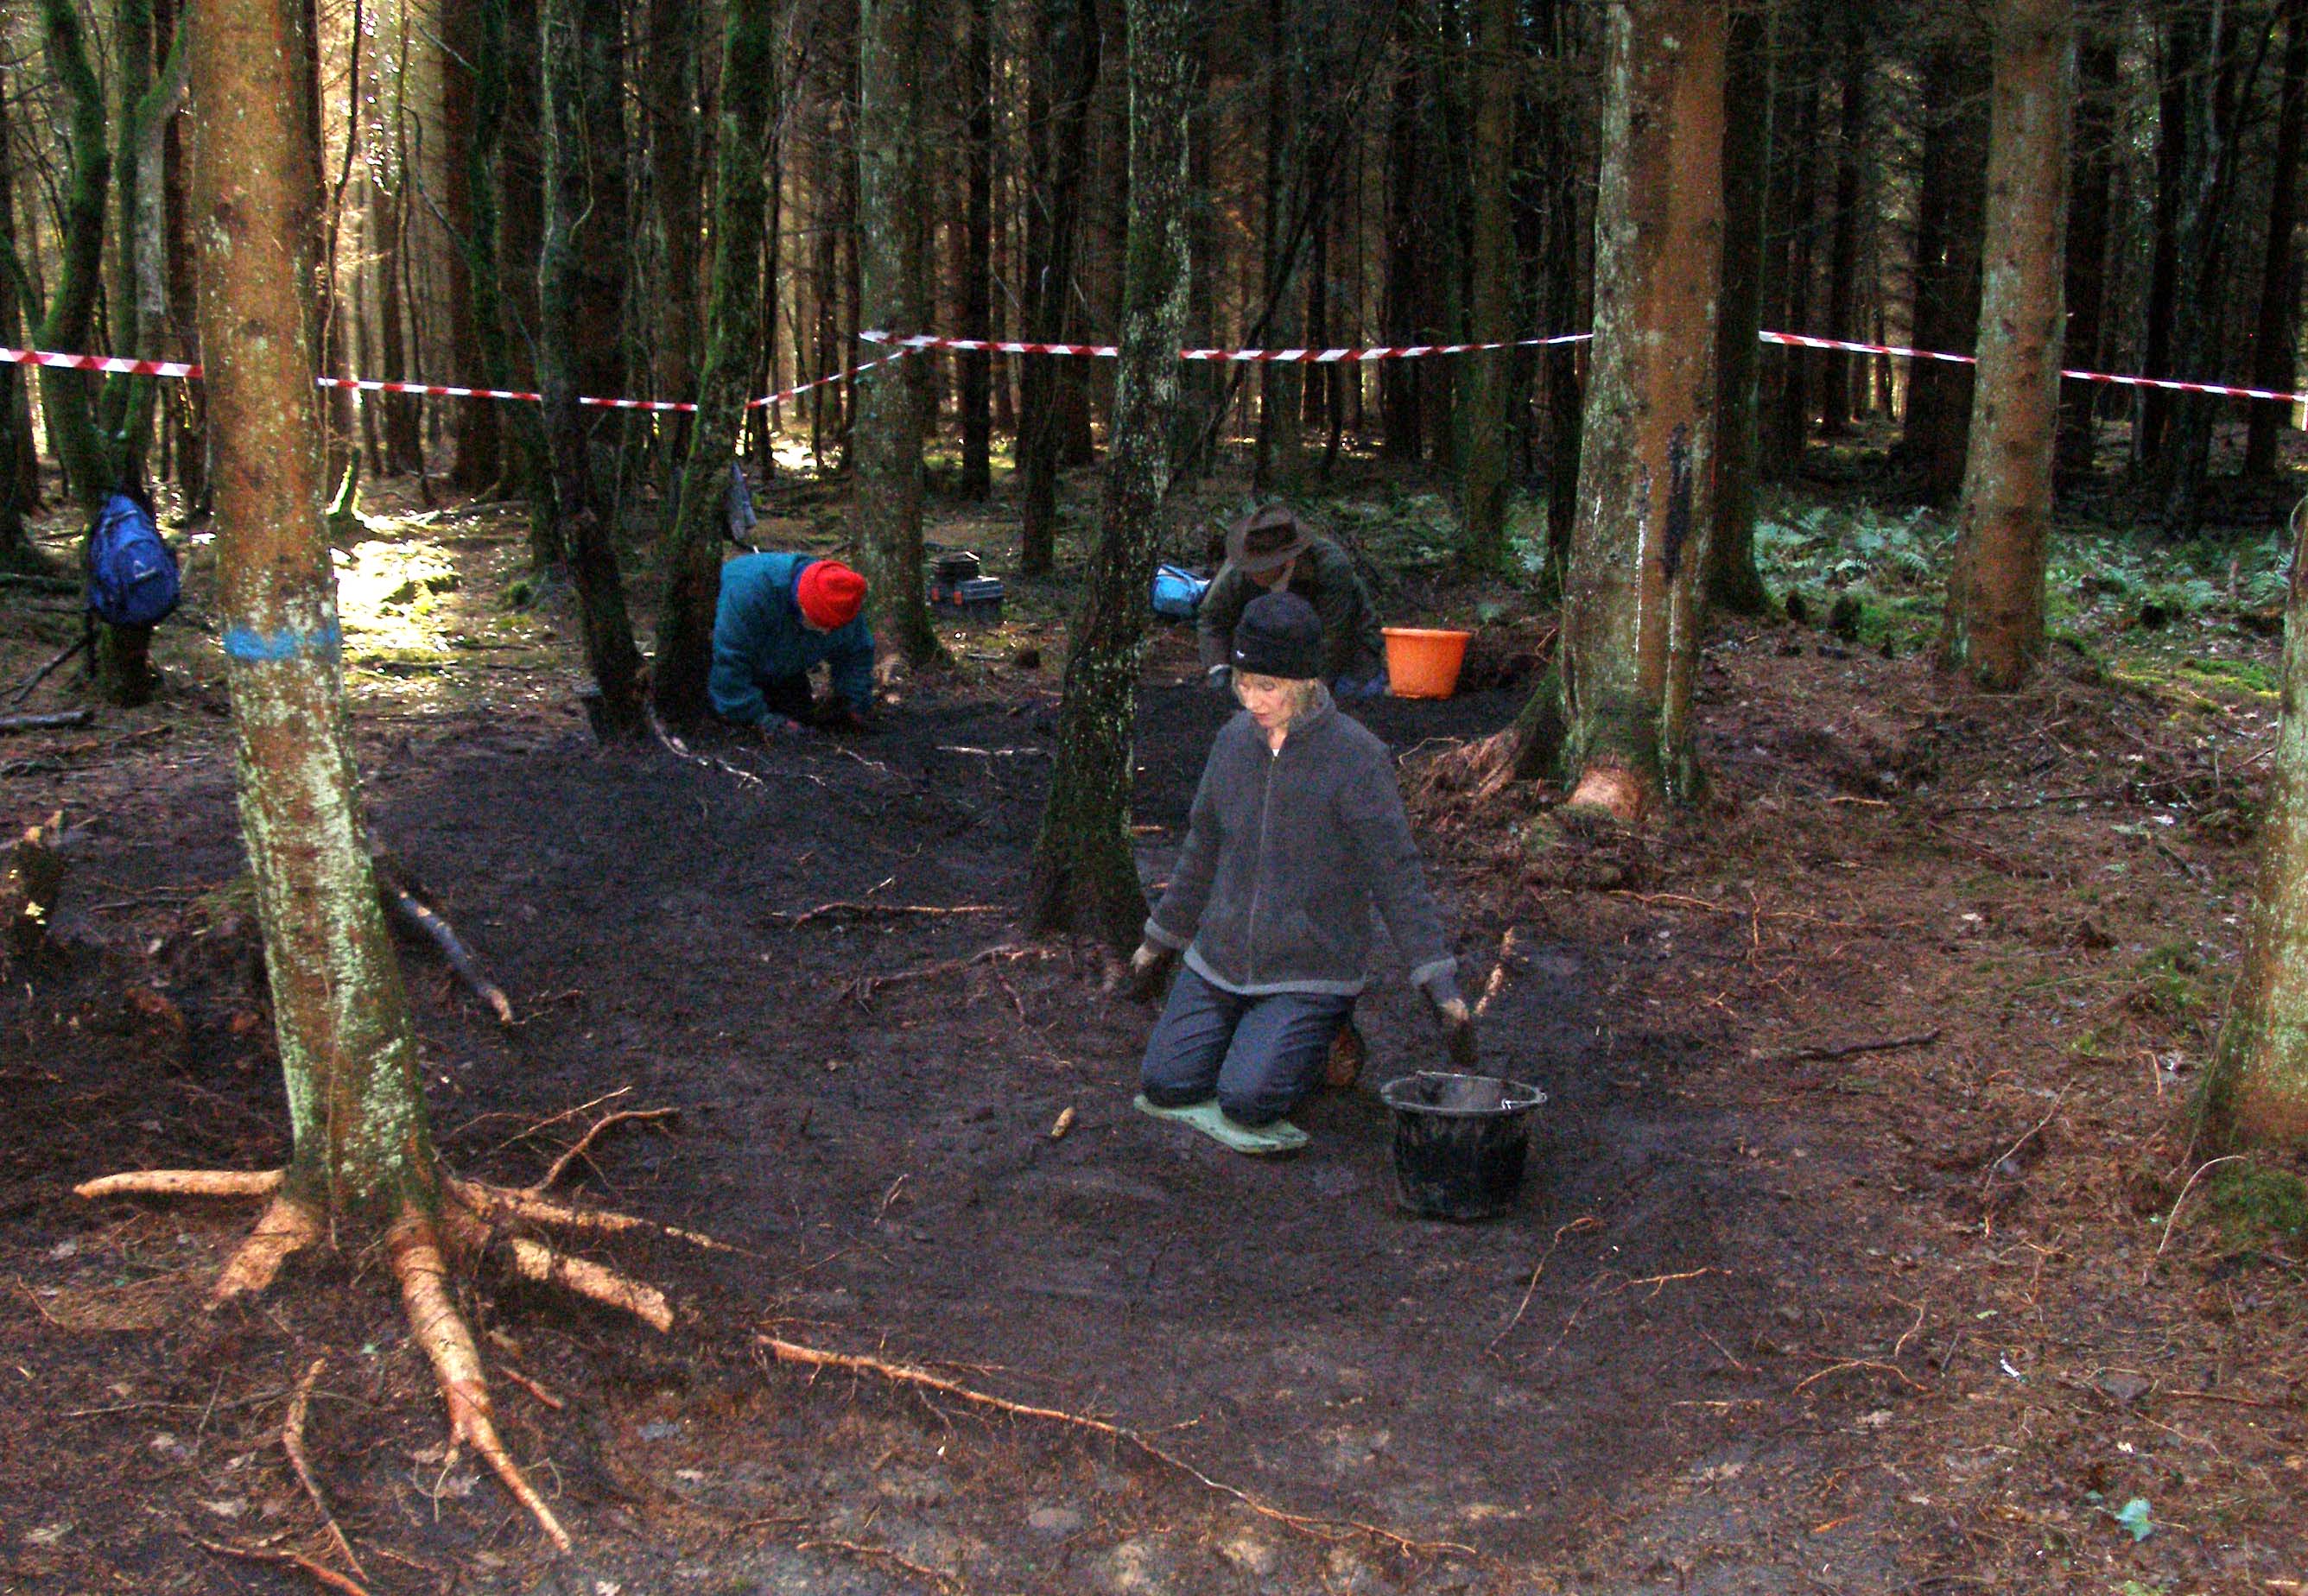 Digging charcoal hearths in Wentwood Forest